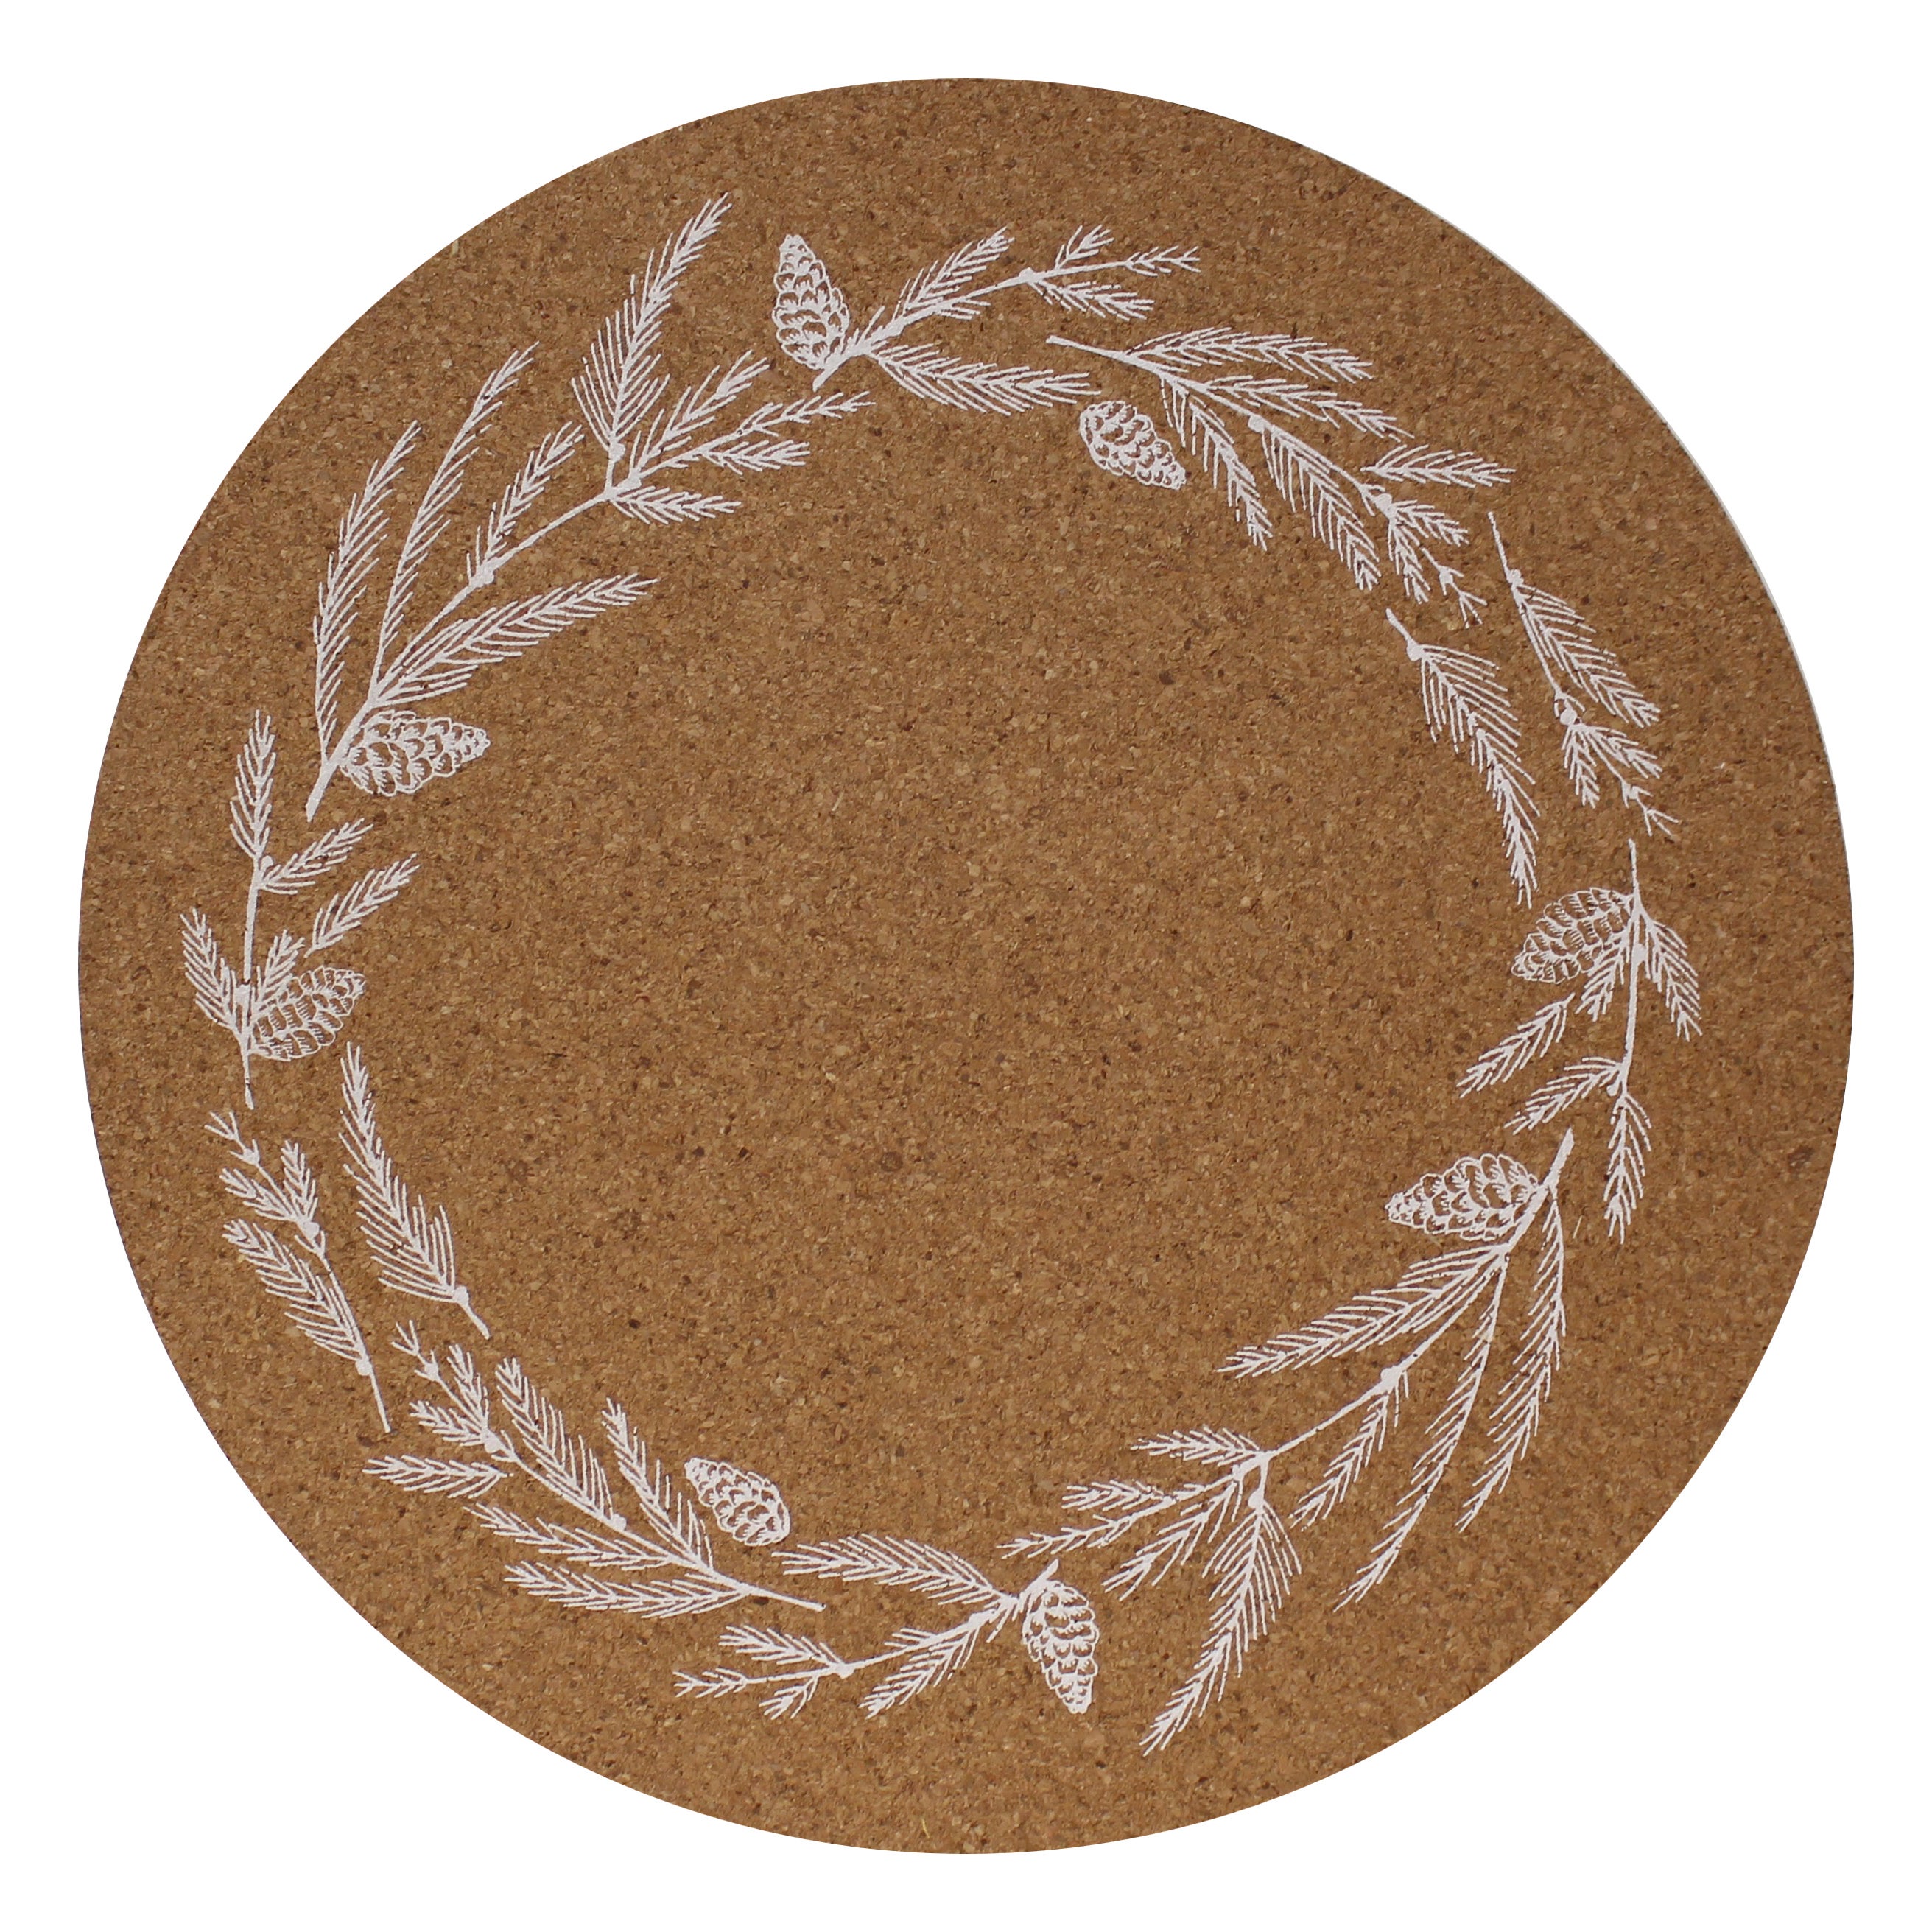 Pack of 4 printed Cork Placemats